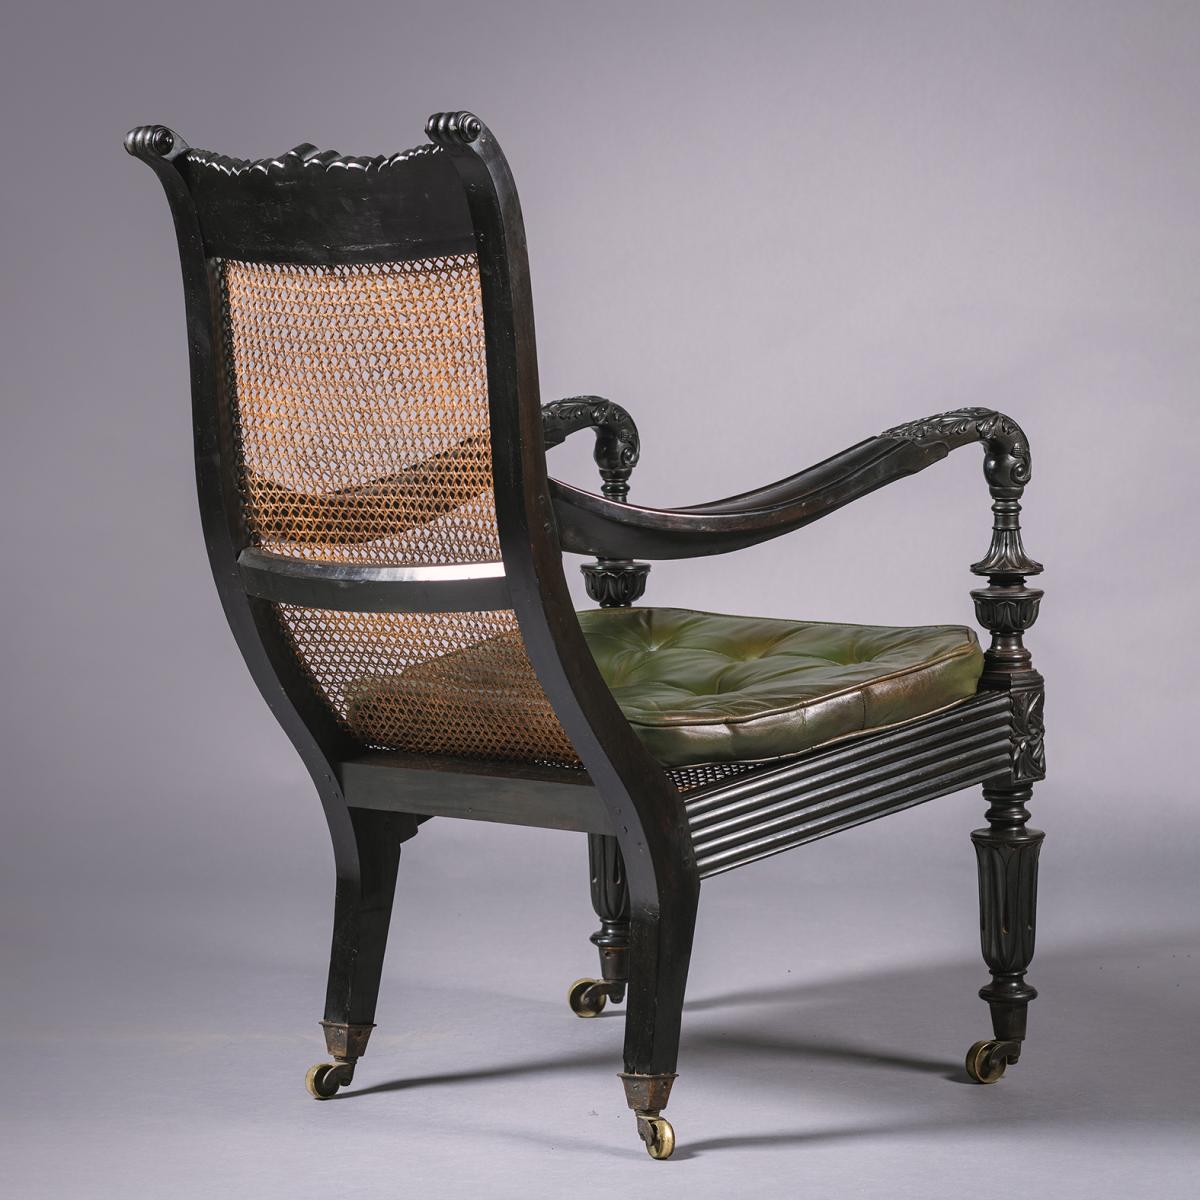 Two Anglo-Indian Carved Ebony Easy Armchairs